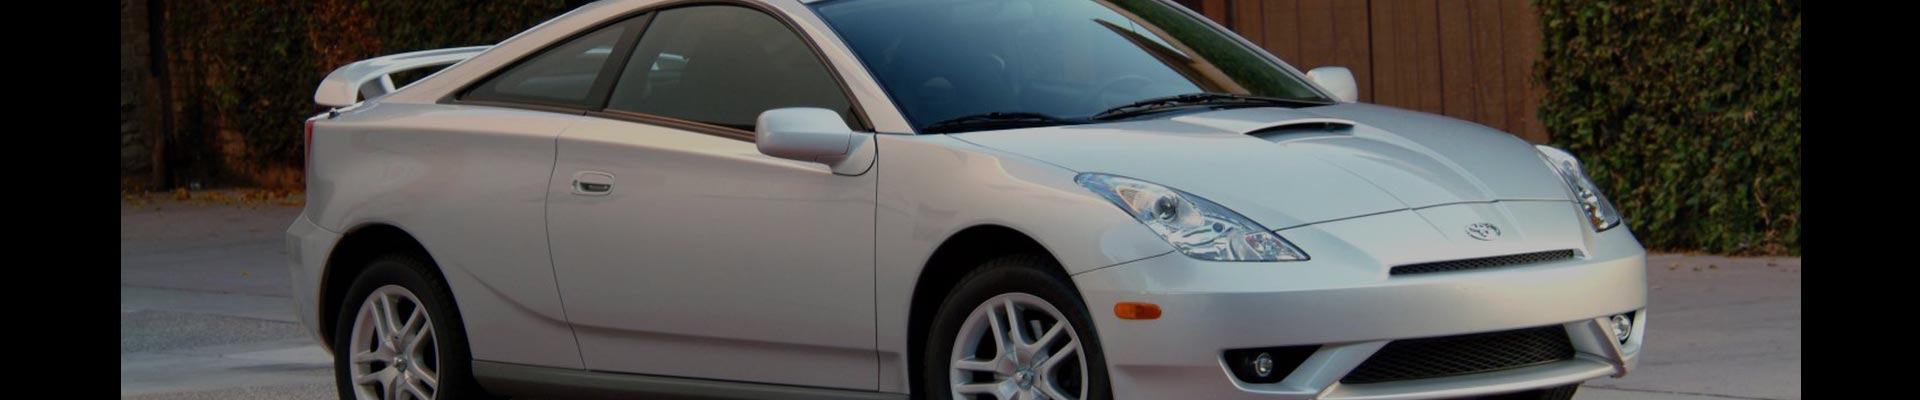 Shop Replacement and OEM Toyota Celica Parts with Discounted Price on the Net